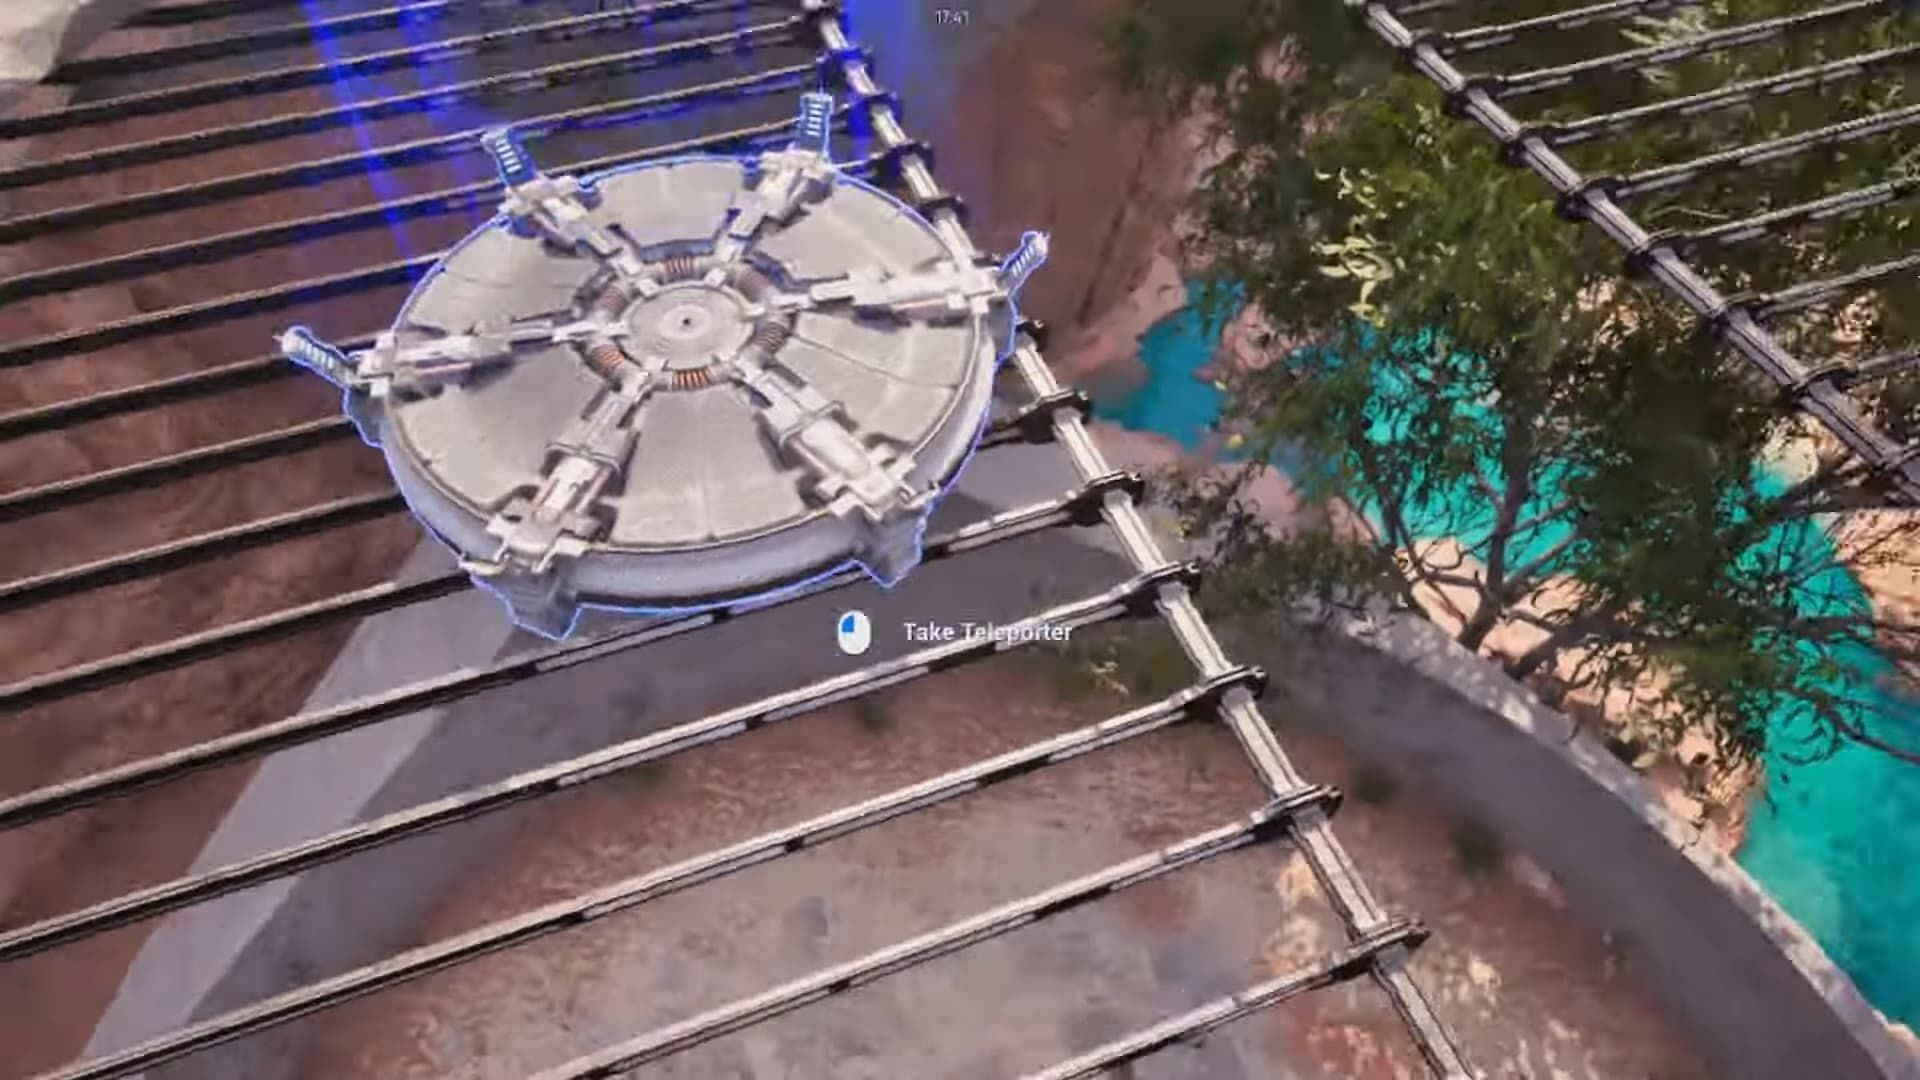 Place the Teleporter where you can access it from the ground (Image via Croteam)